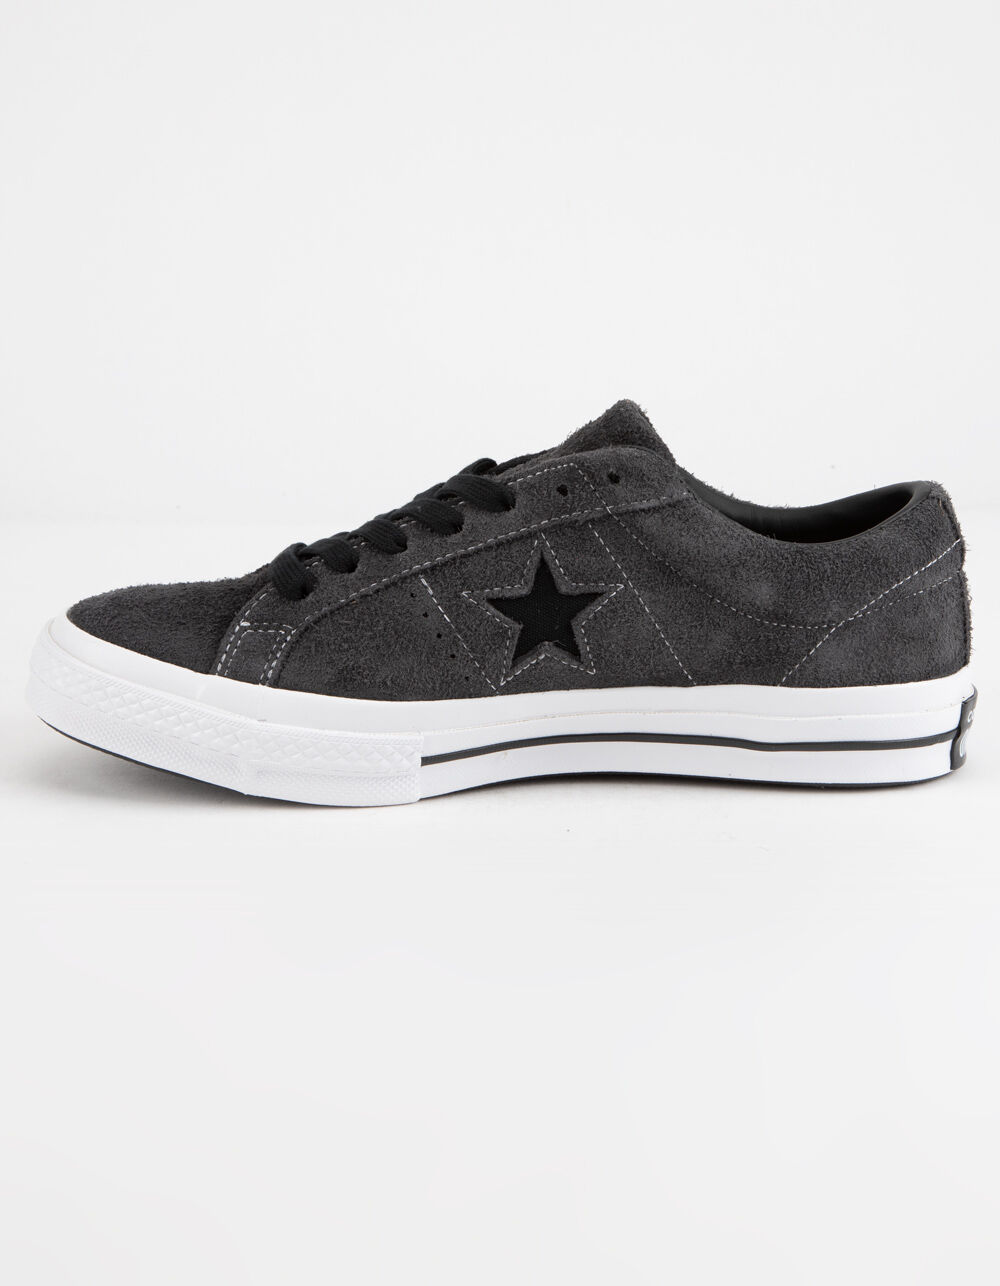 CONVERSE One Star OX Almost Black Shoes - ALMOST BLACK | Tillys